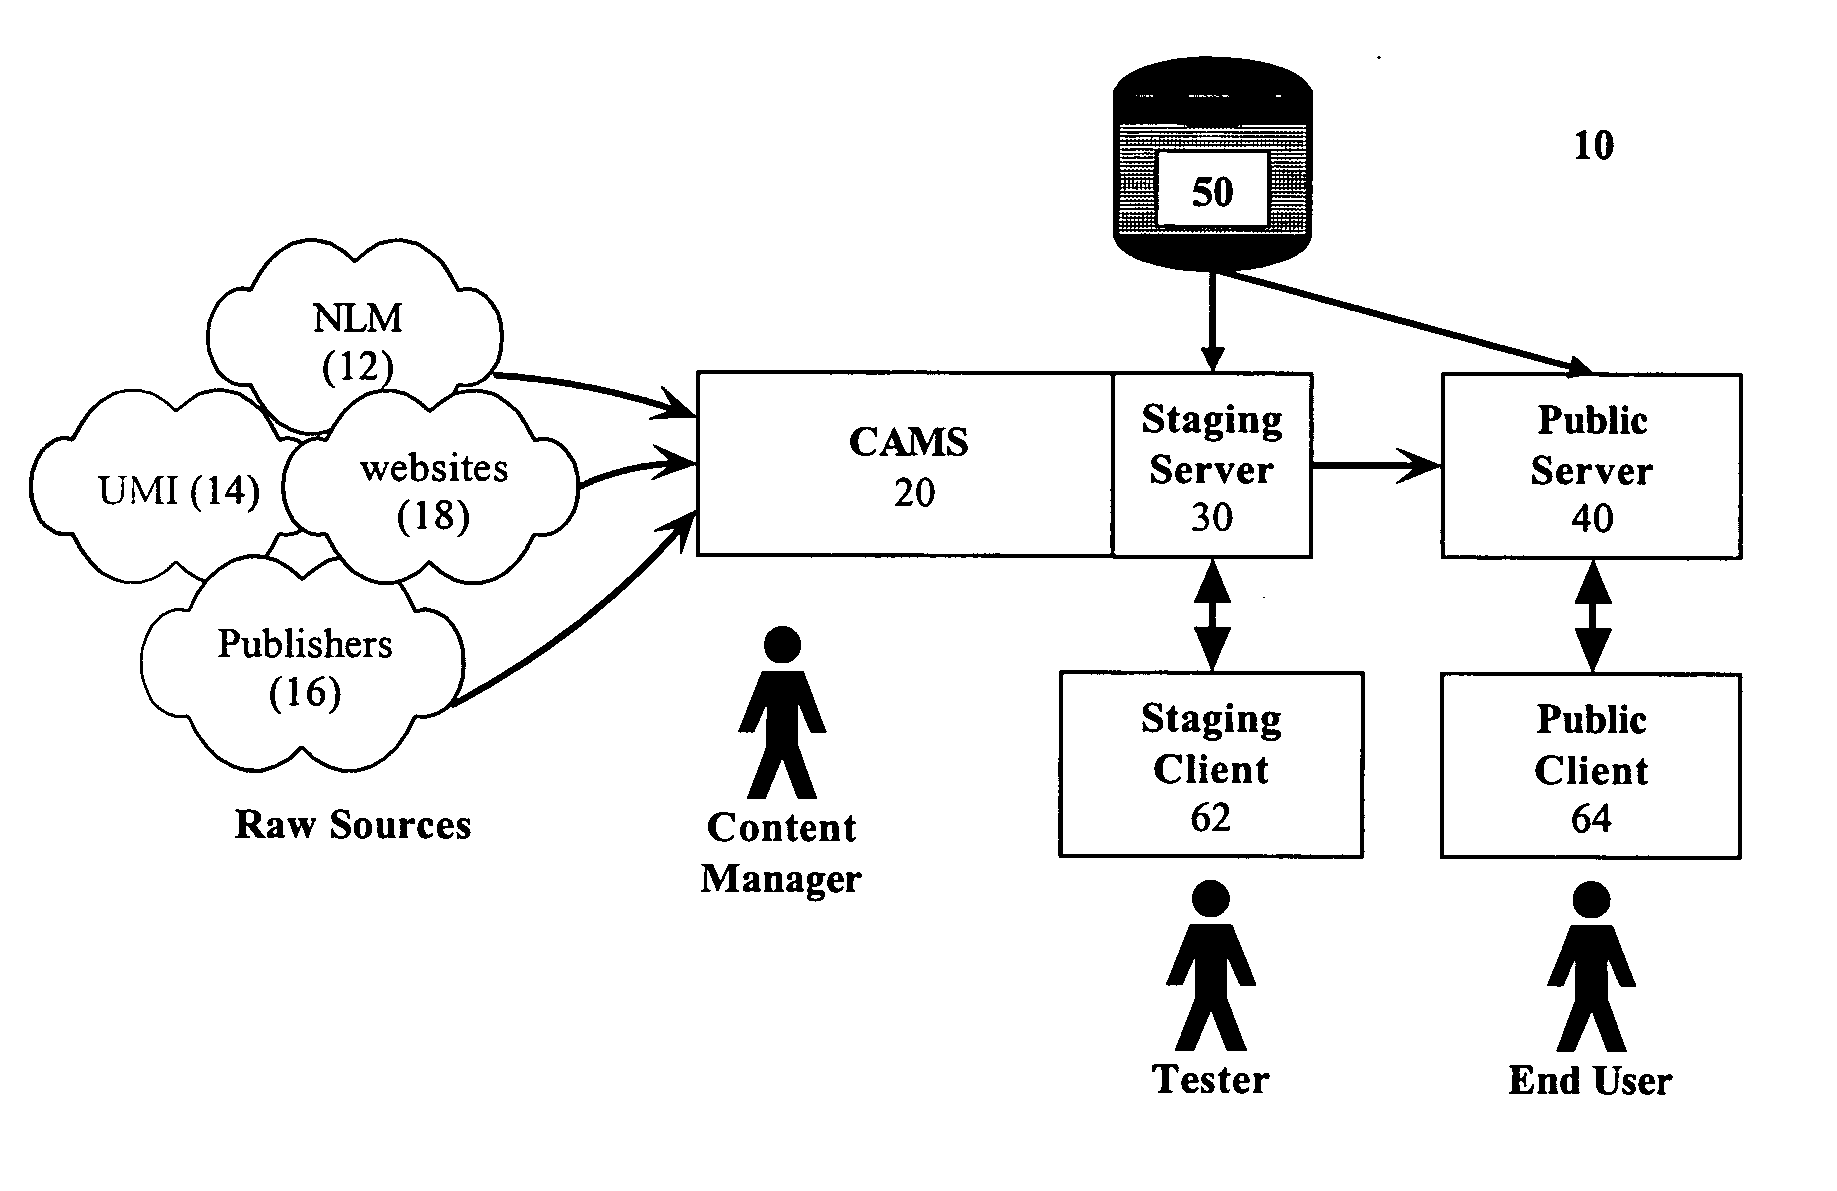 Systems and methods for creating and publishing relational data bases